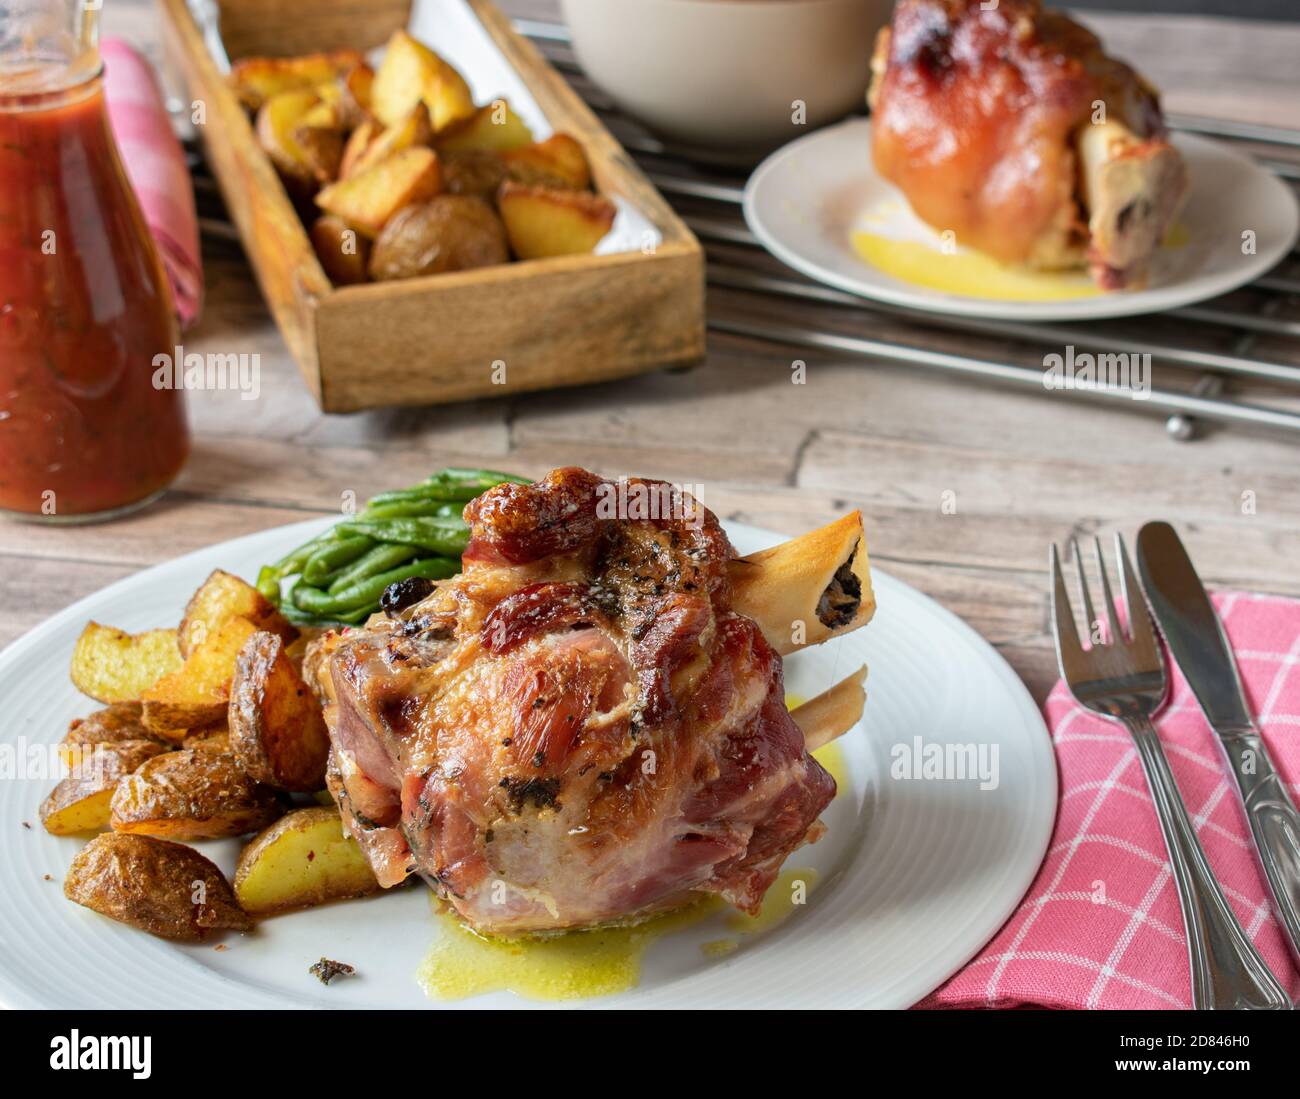 roasted knuckle of pork served with potatoes on a plate Stock Photo